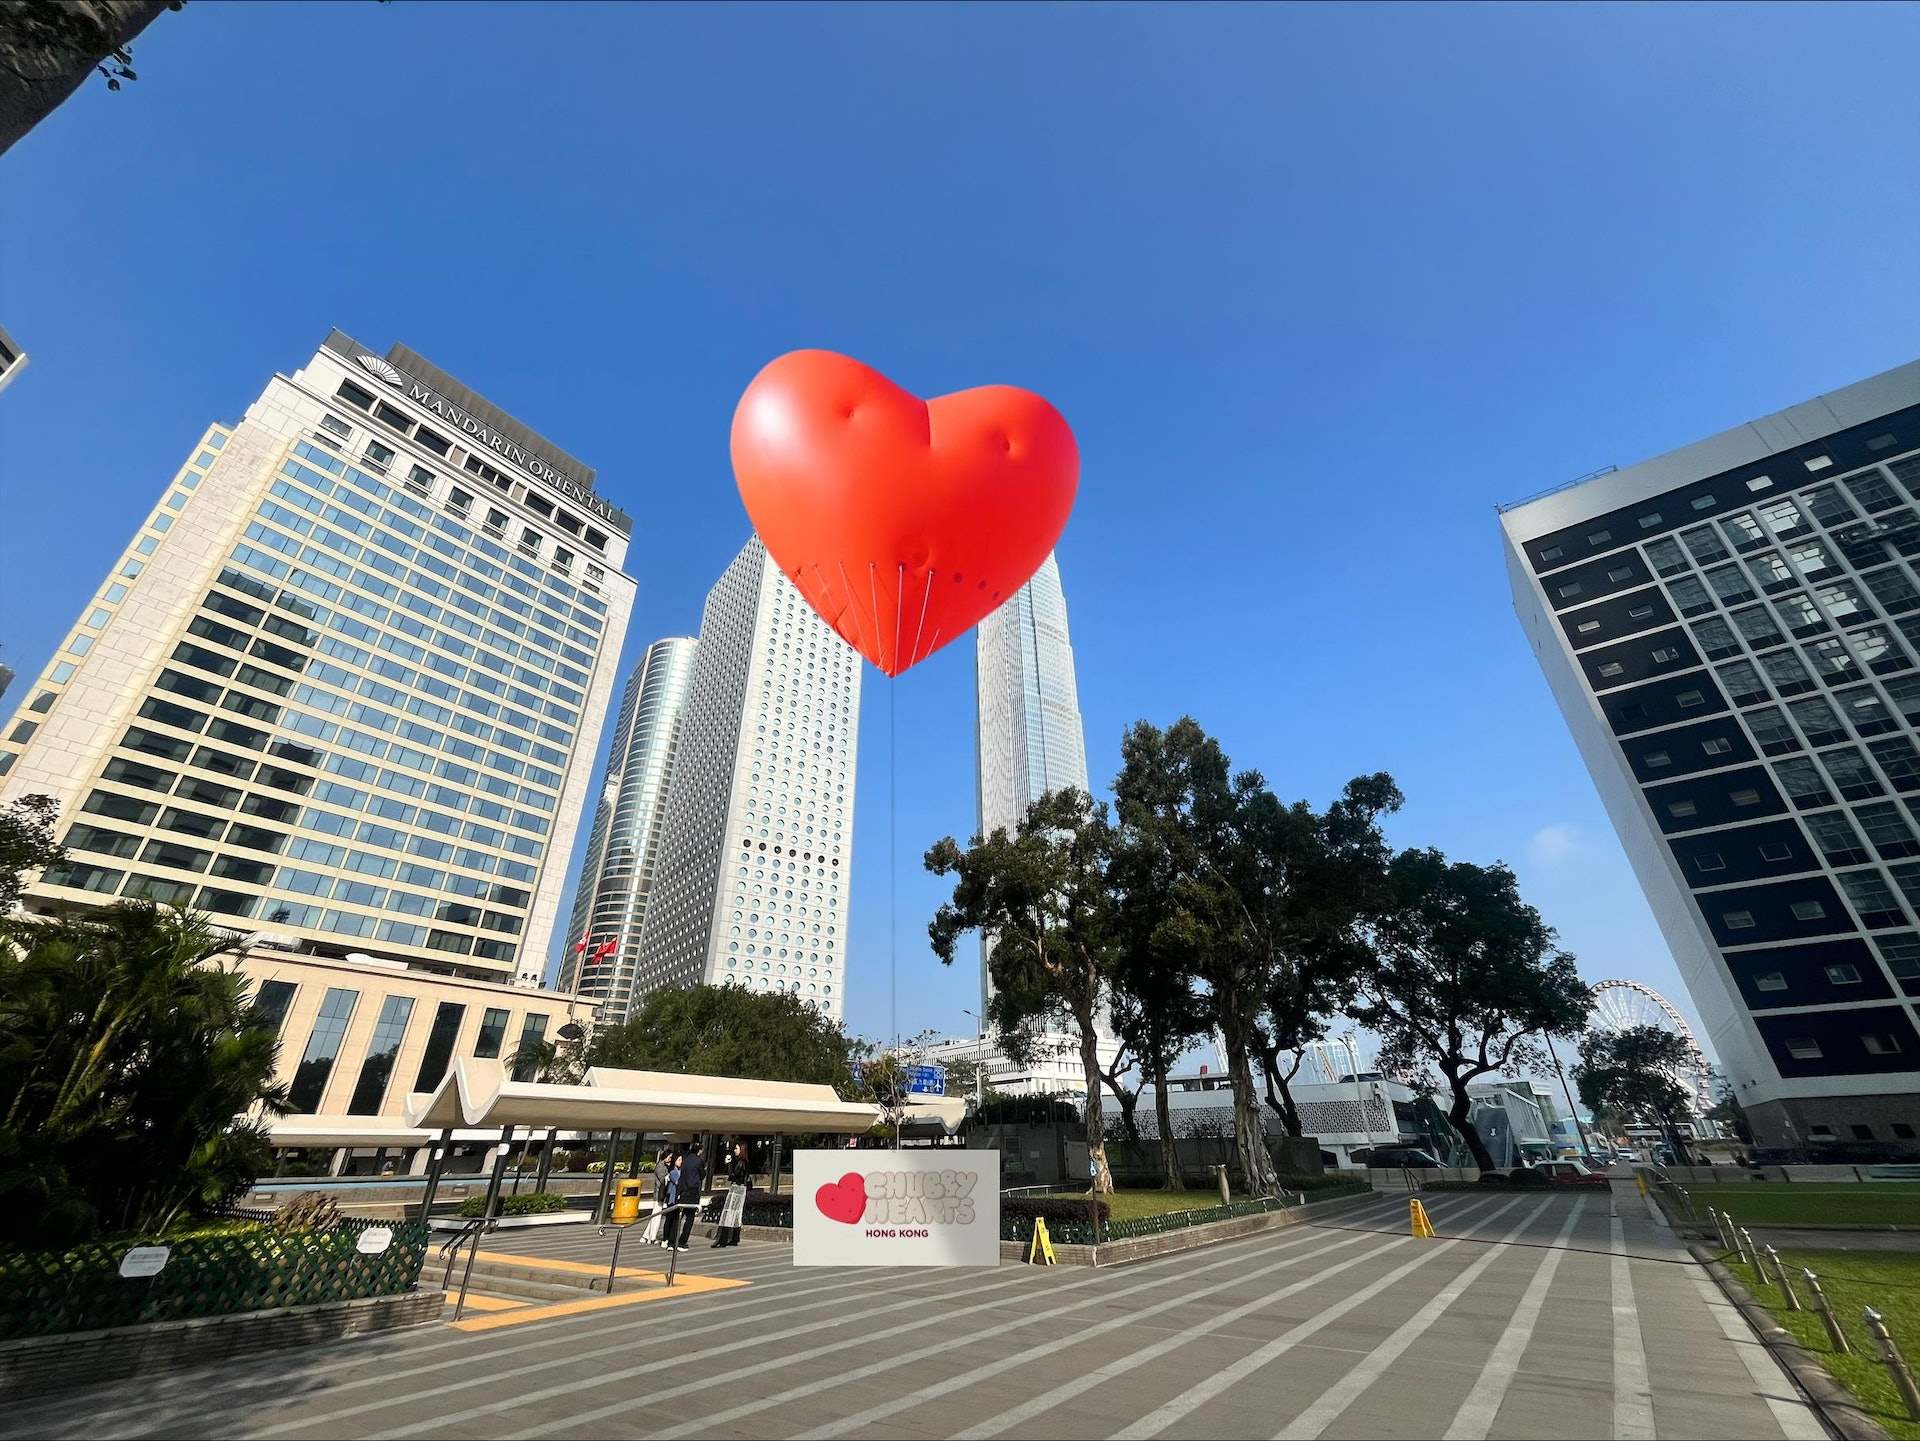 An illustration showing the giant heart-shaped balloon in Central. Photo: Culture, Sports and Tourism Bureau